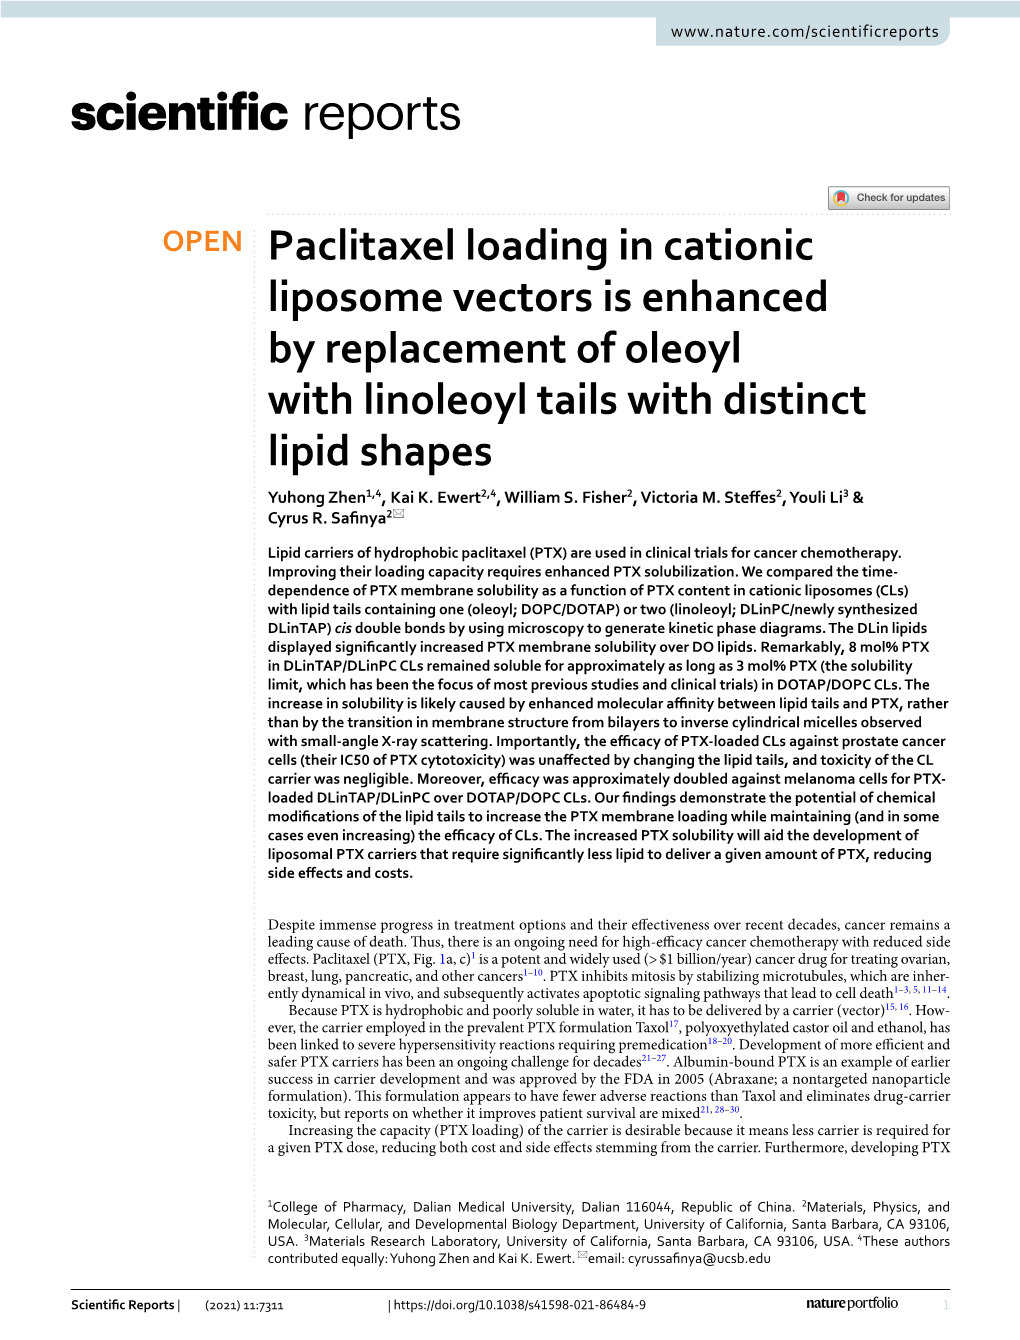 Paclitaxel Loading in Cationic Liposome Vectors Is Enhanced by Replacement of Oleoyl with Linoleoyl Tails with Distinct Lipid Shapes Yuhong Zhen1,4, Kai K